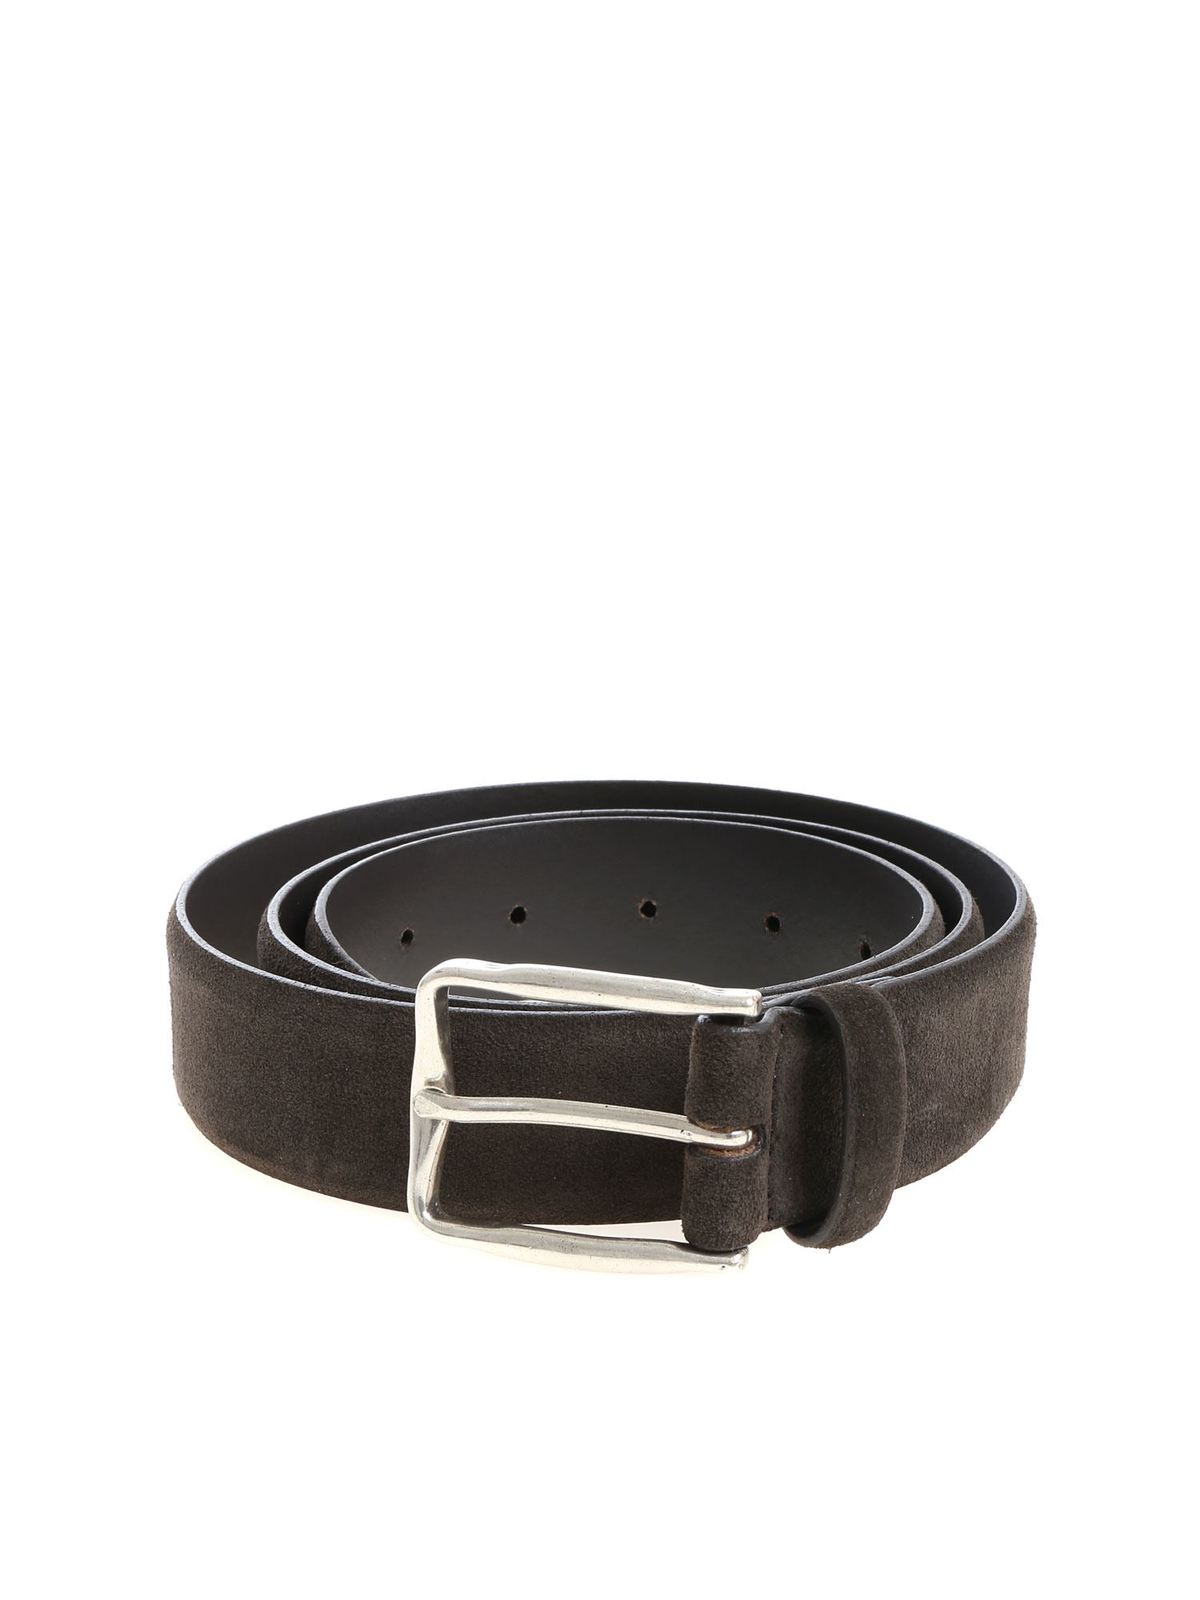 Andrea D'amico Brown Suede Belt